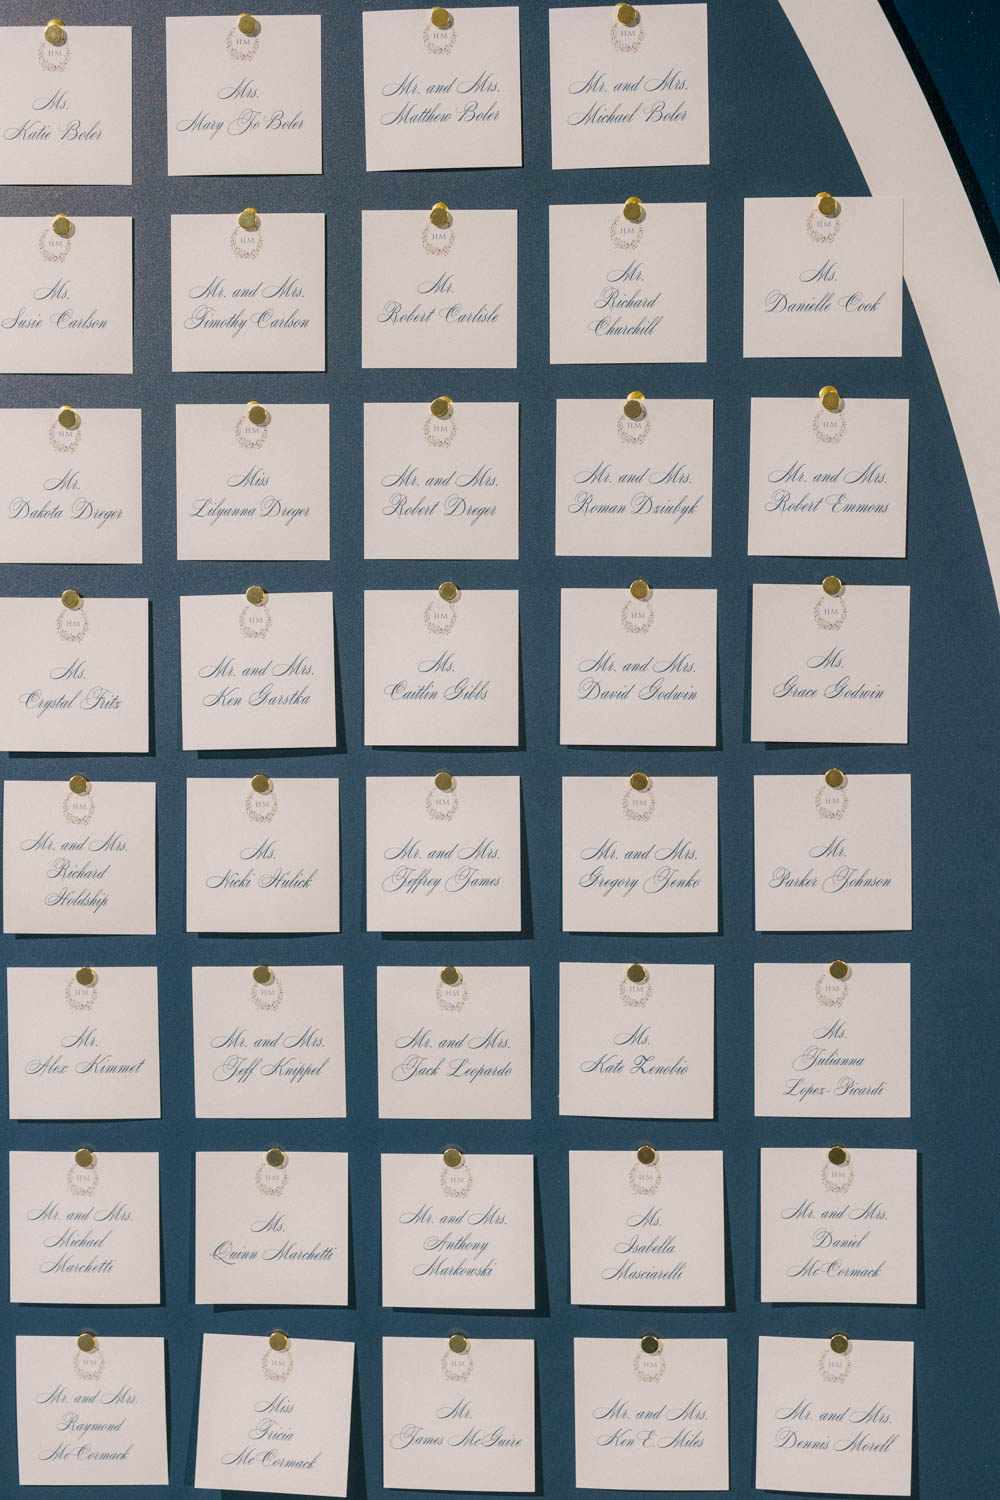 A closeup of the escort cards designed by Life in Bloom